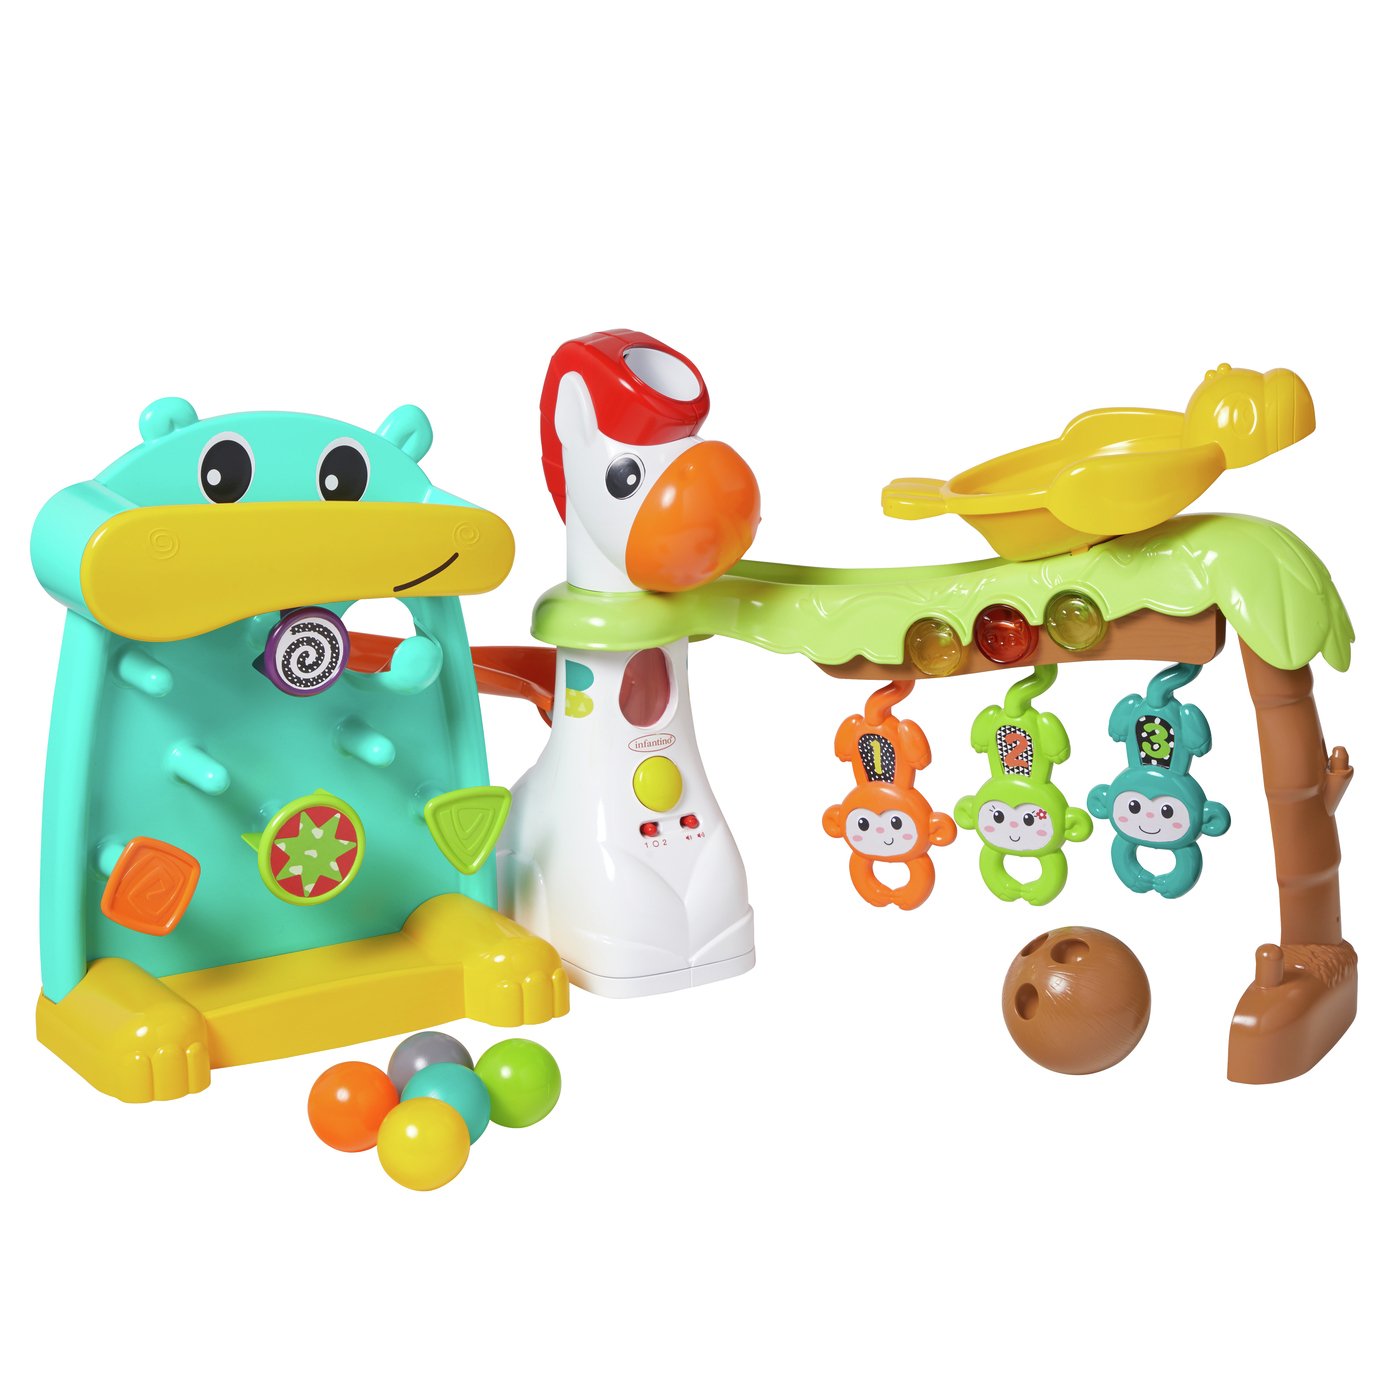 Infantino 4-in-1 Grow with Me Playland